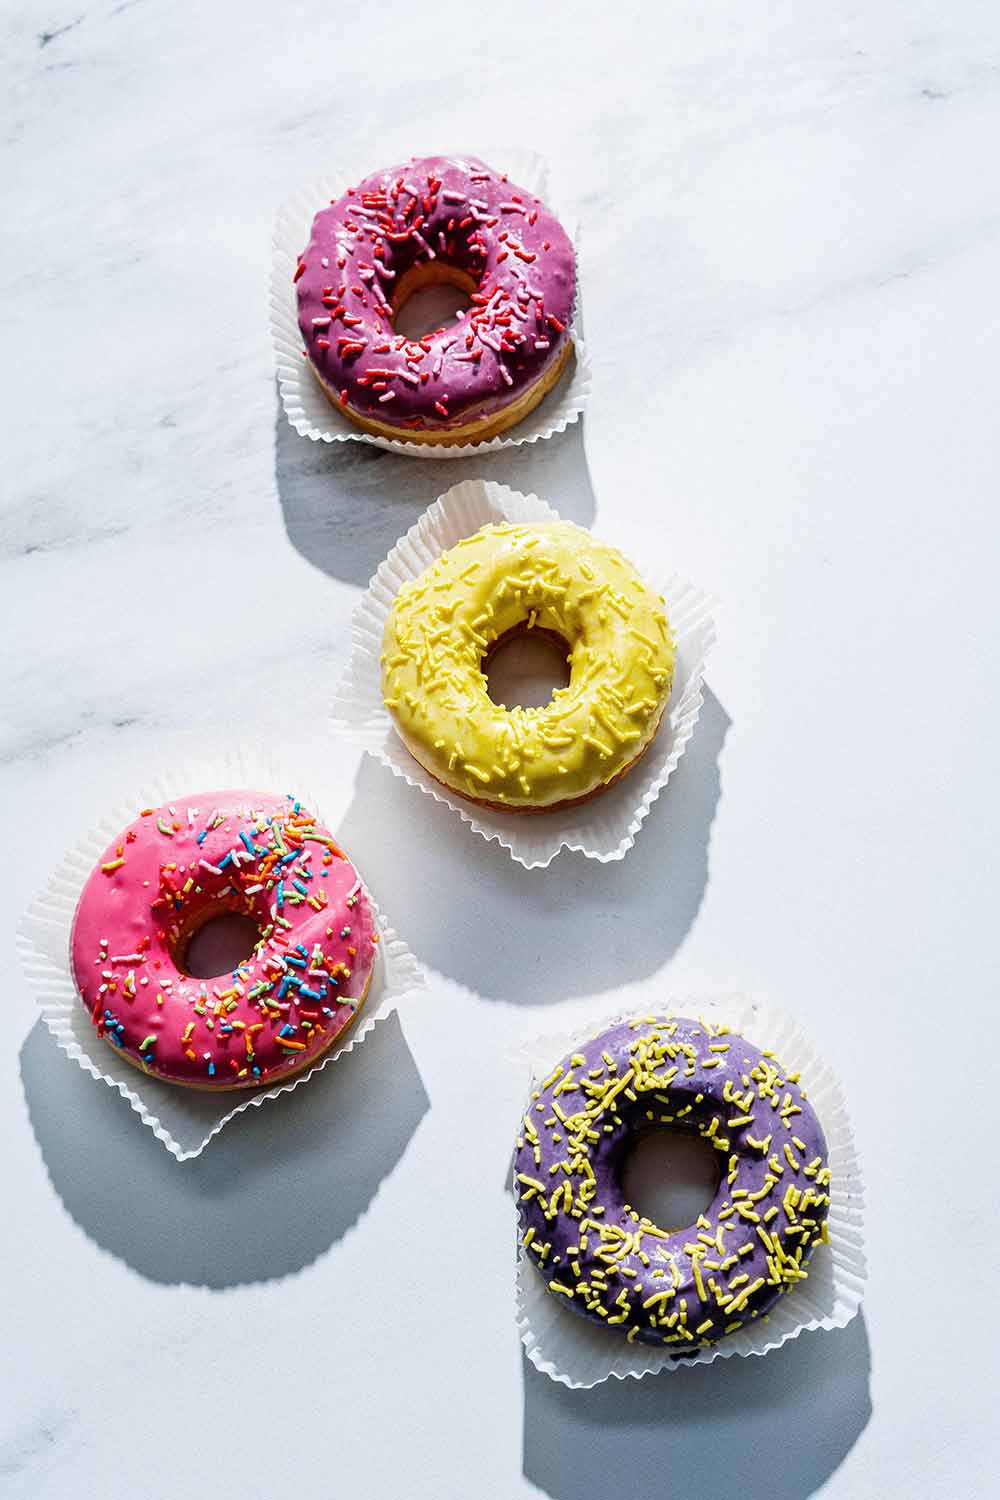 4 donuts, one has yellow frosting, purple frosting, pink frosting and dark pink frosting on a white background.